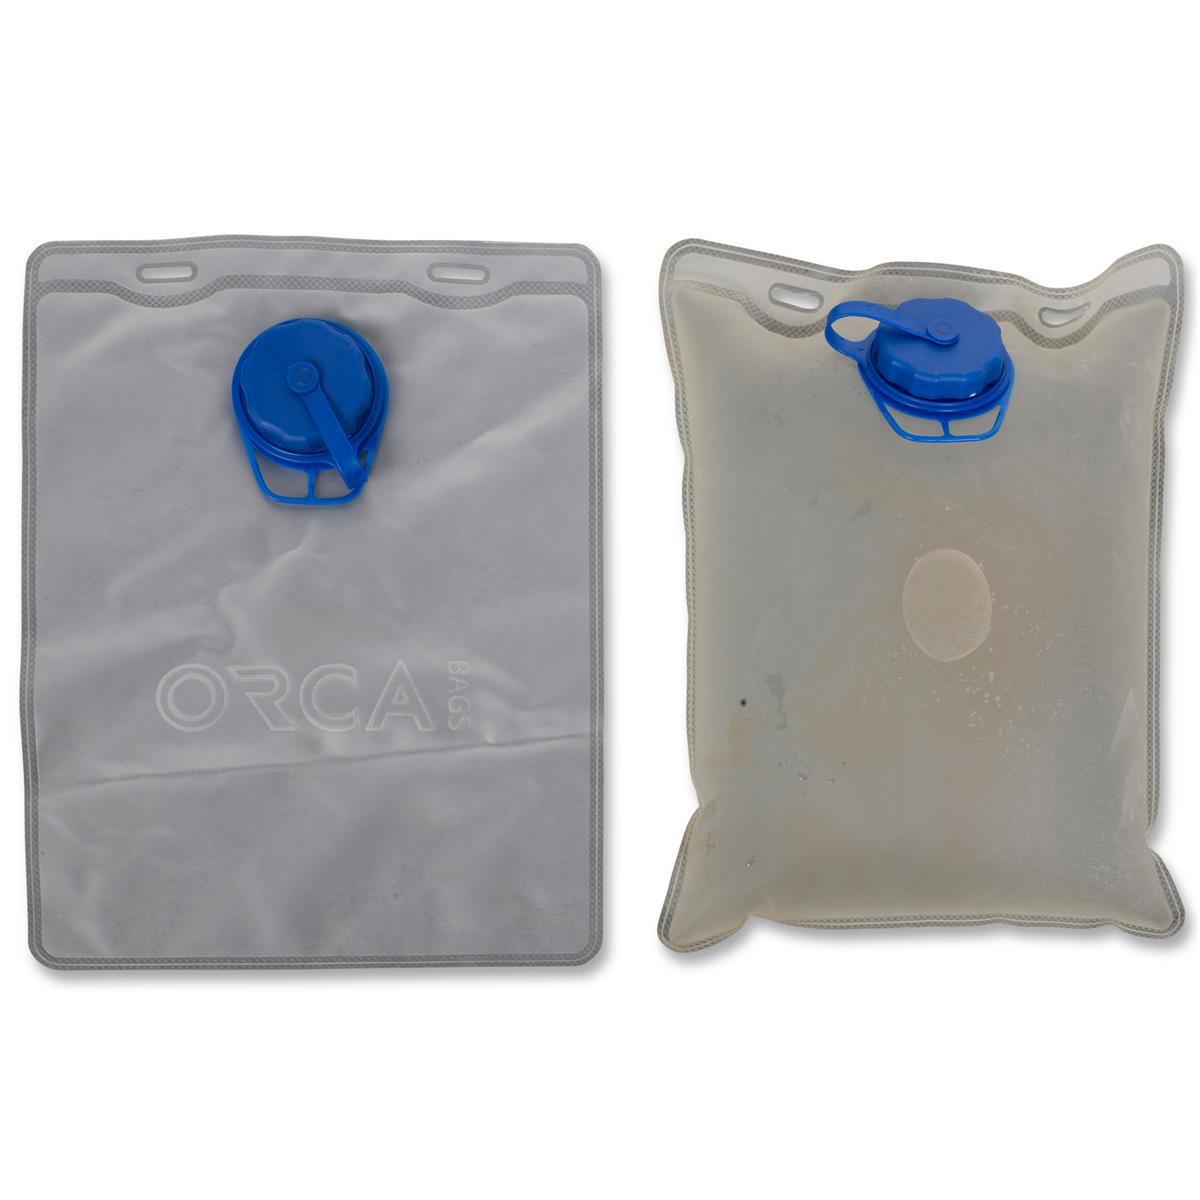 Image of Orca OR-83 Sand/Water Bag